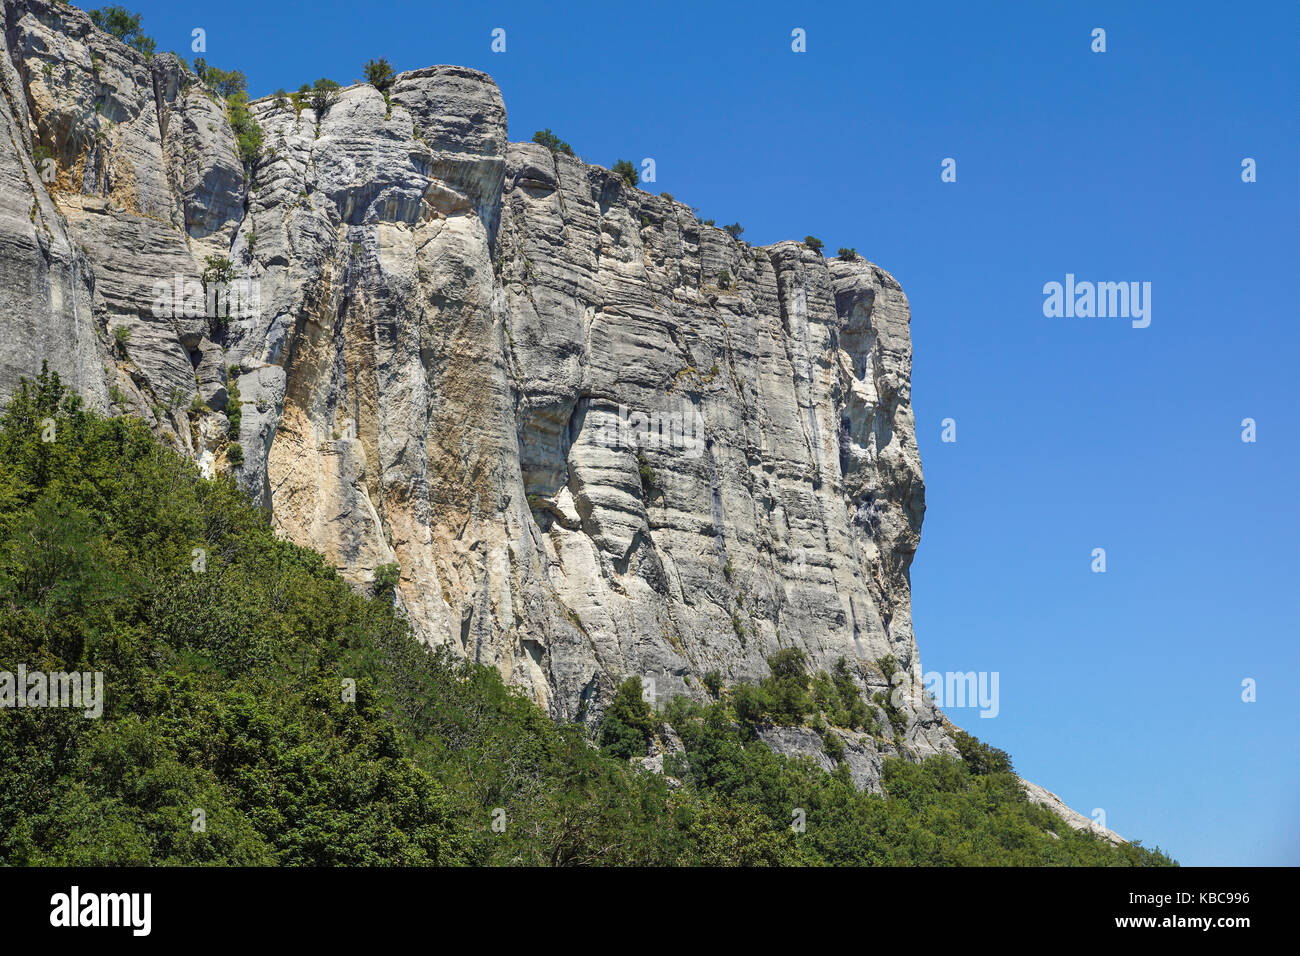 Giant sharp stones among the grass on the top of mountain meadows in vertical mountain landscape Stock Photo